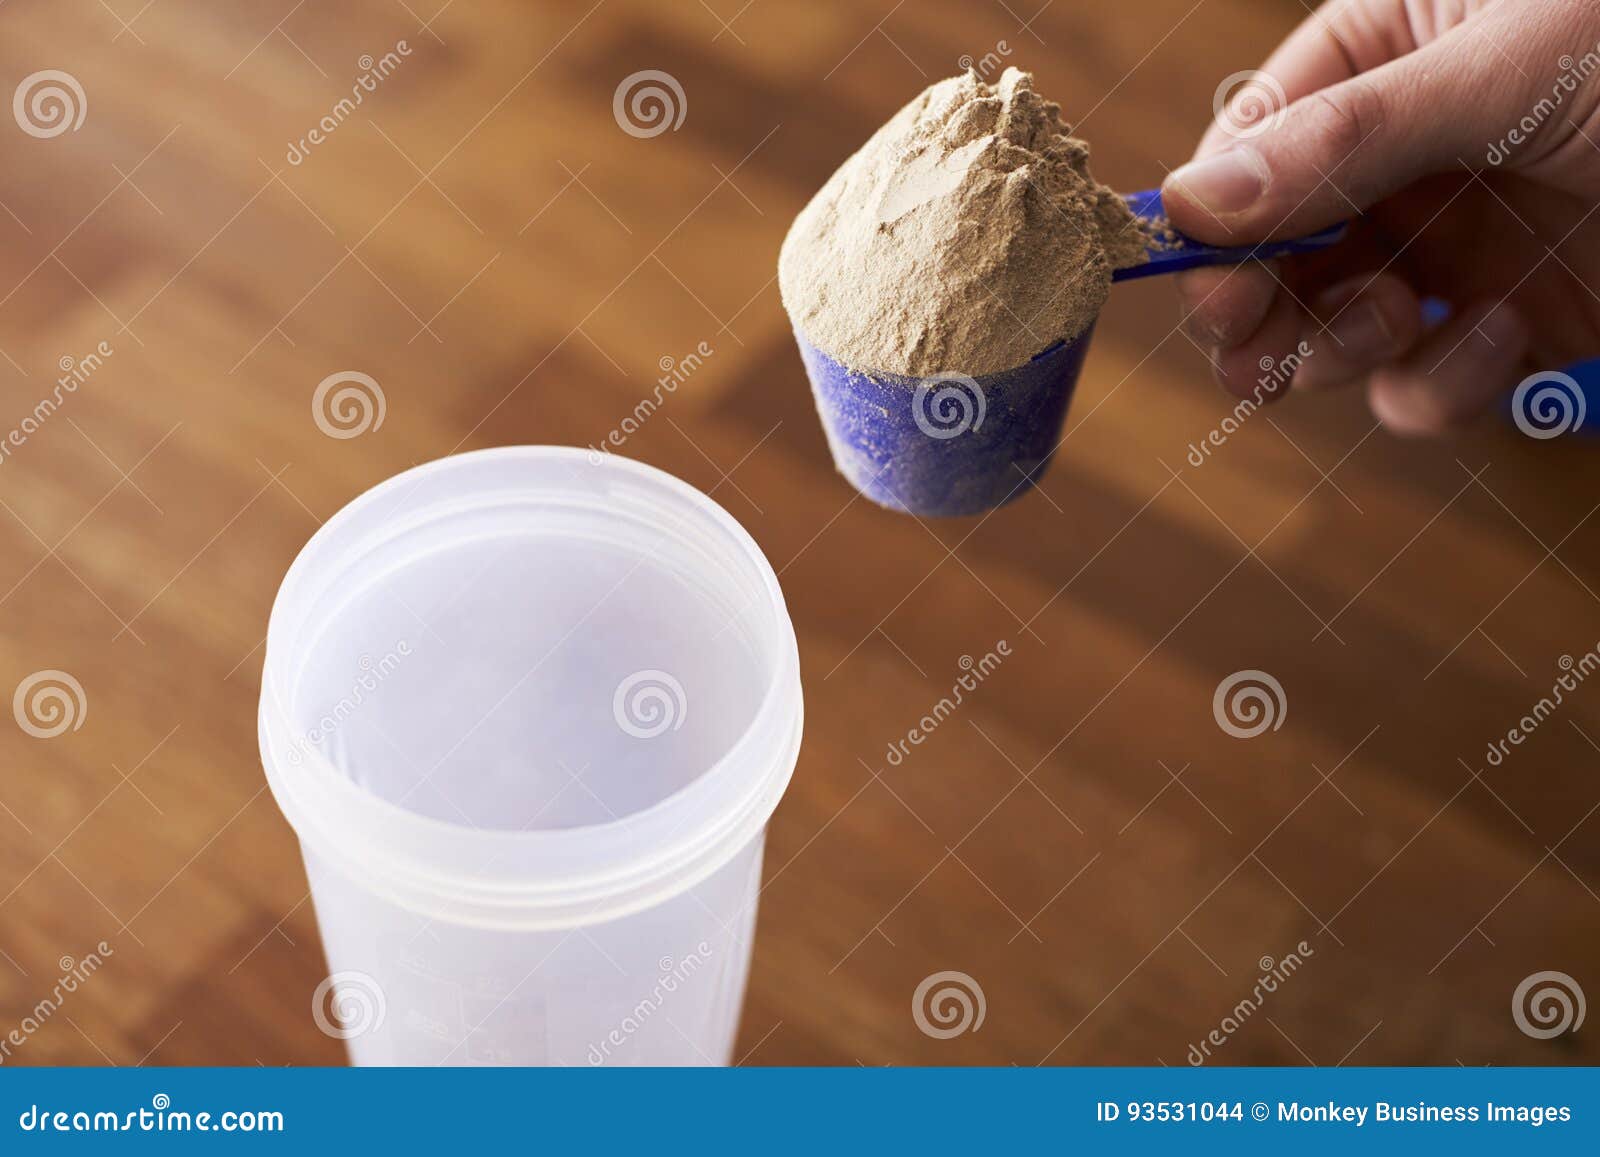 https://thumbs.dreamstime.com/z/close-up-man-mixing-protein-shake-cup-93531044.jpg